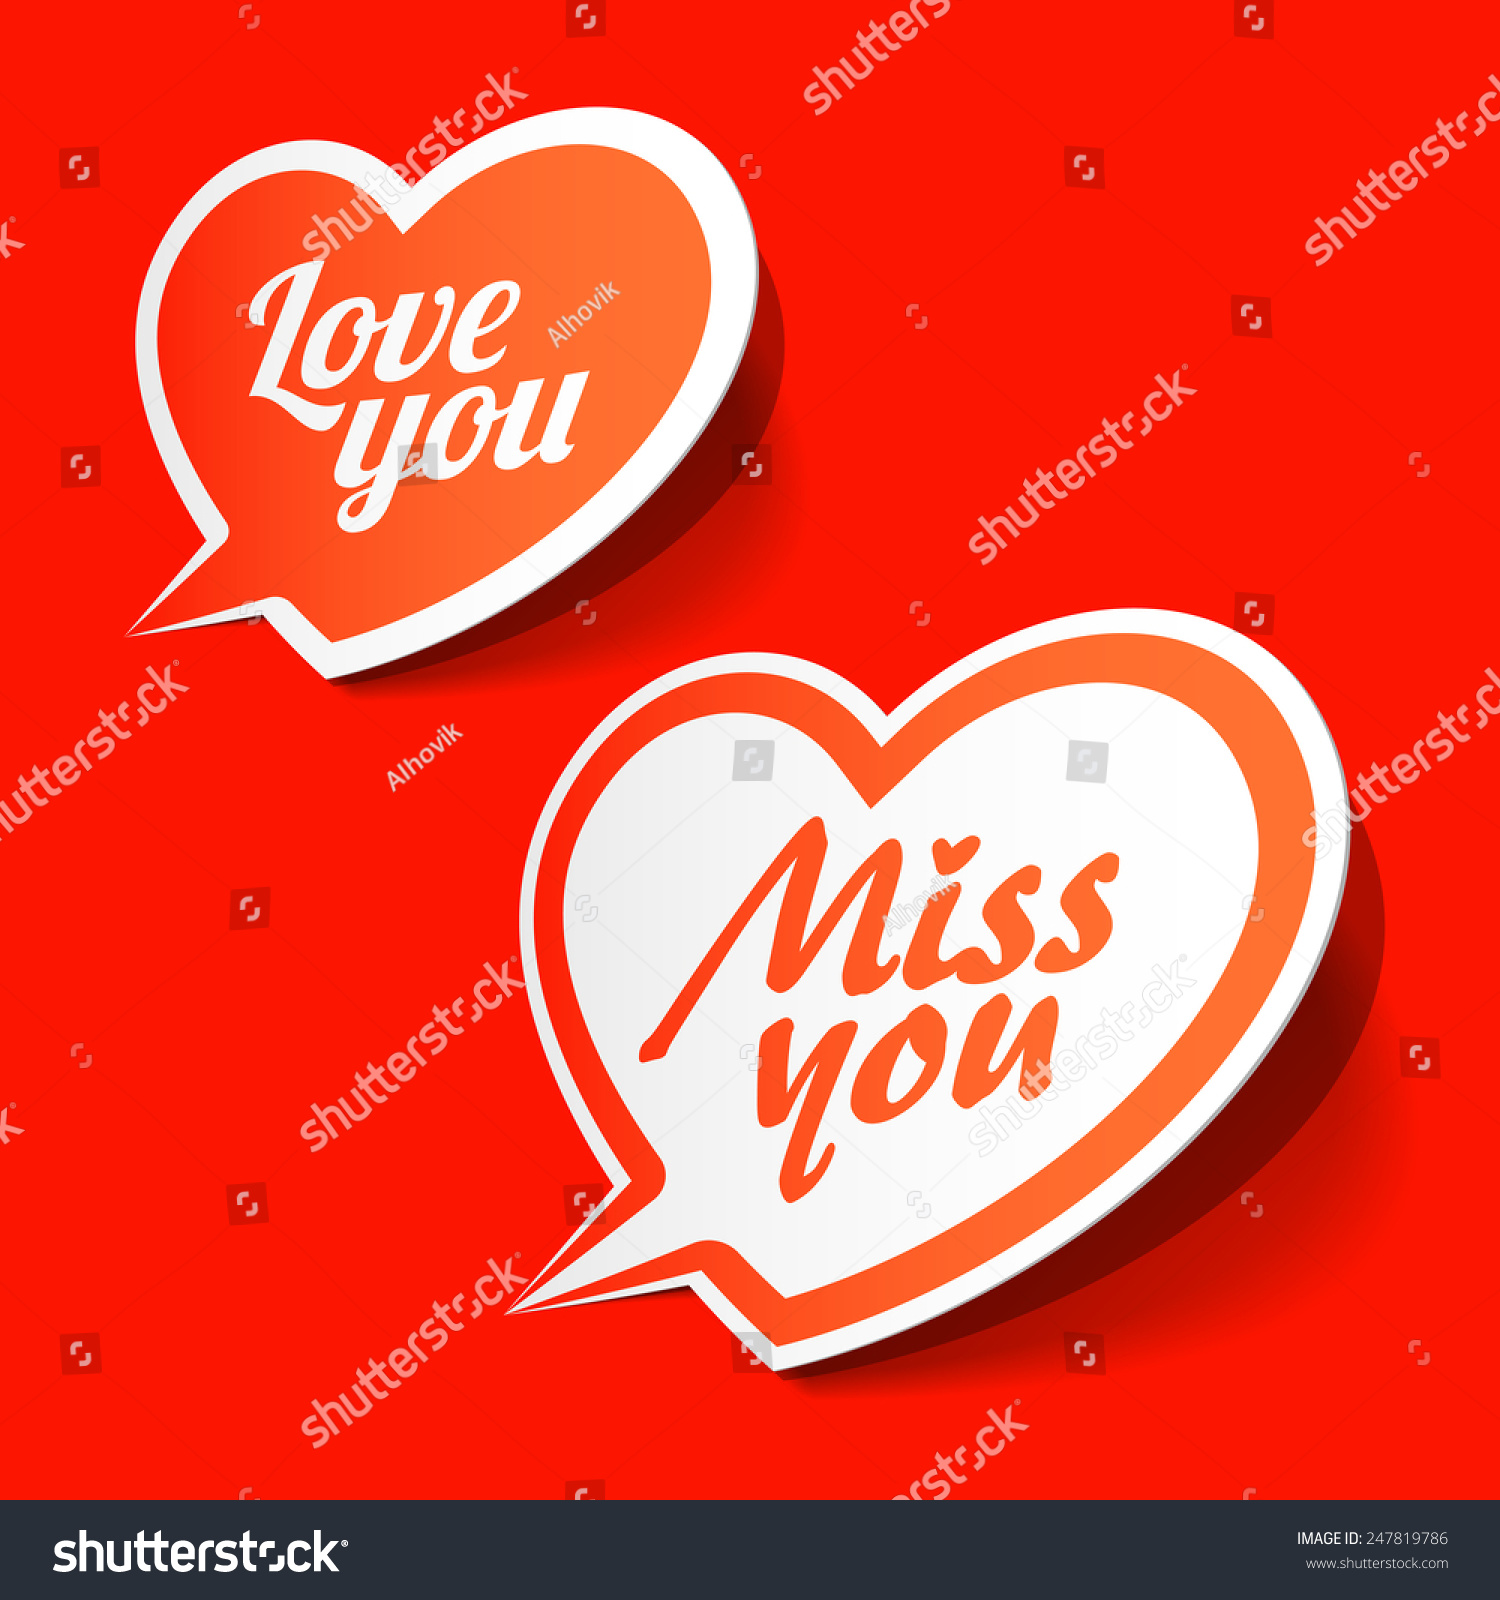 Love You Miss You Heart Shaped Stock Vector (2018) 247819786 ...